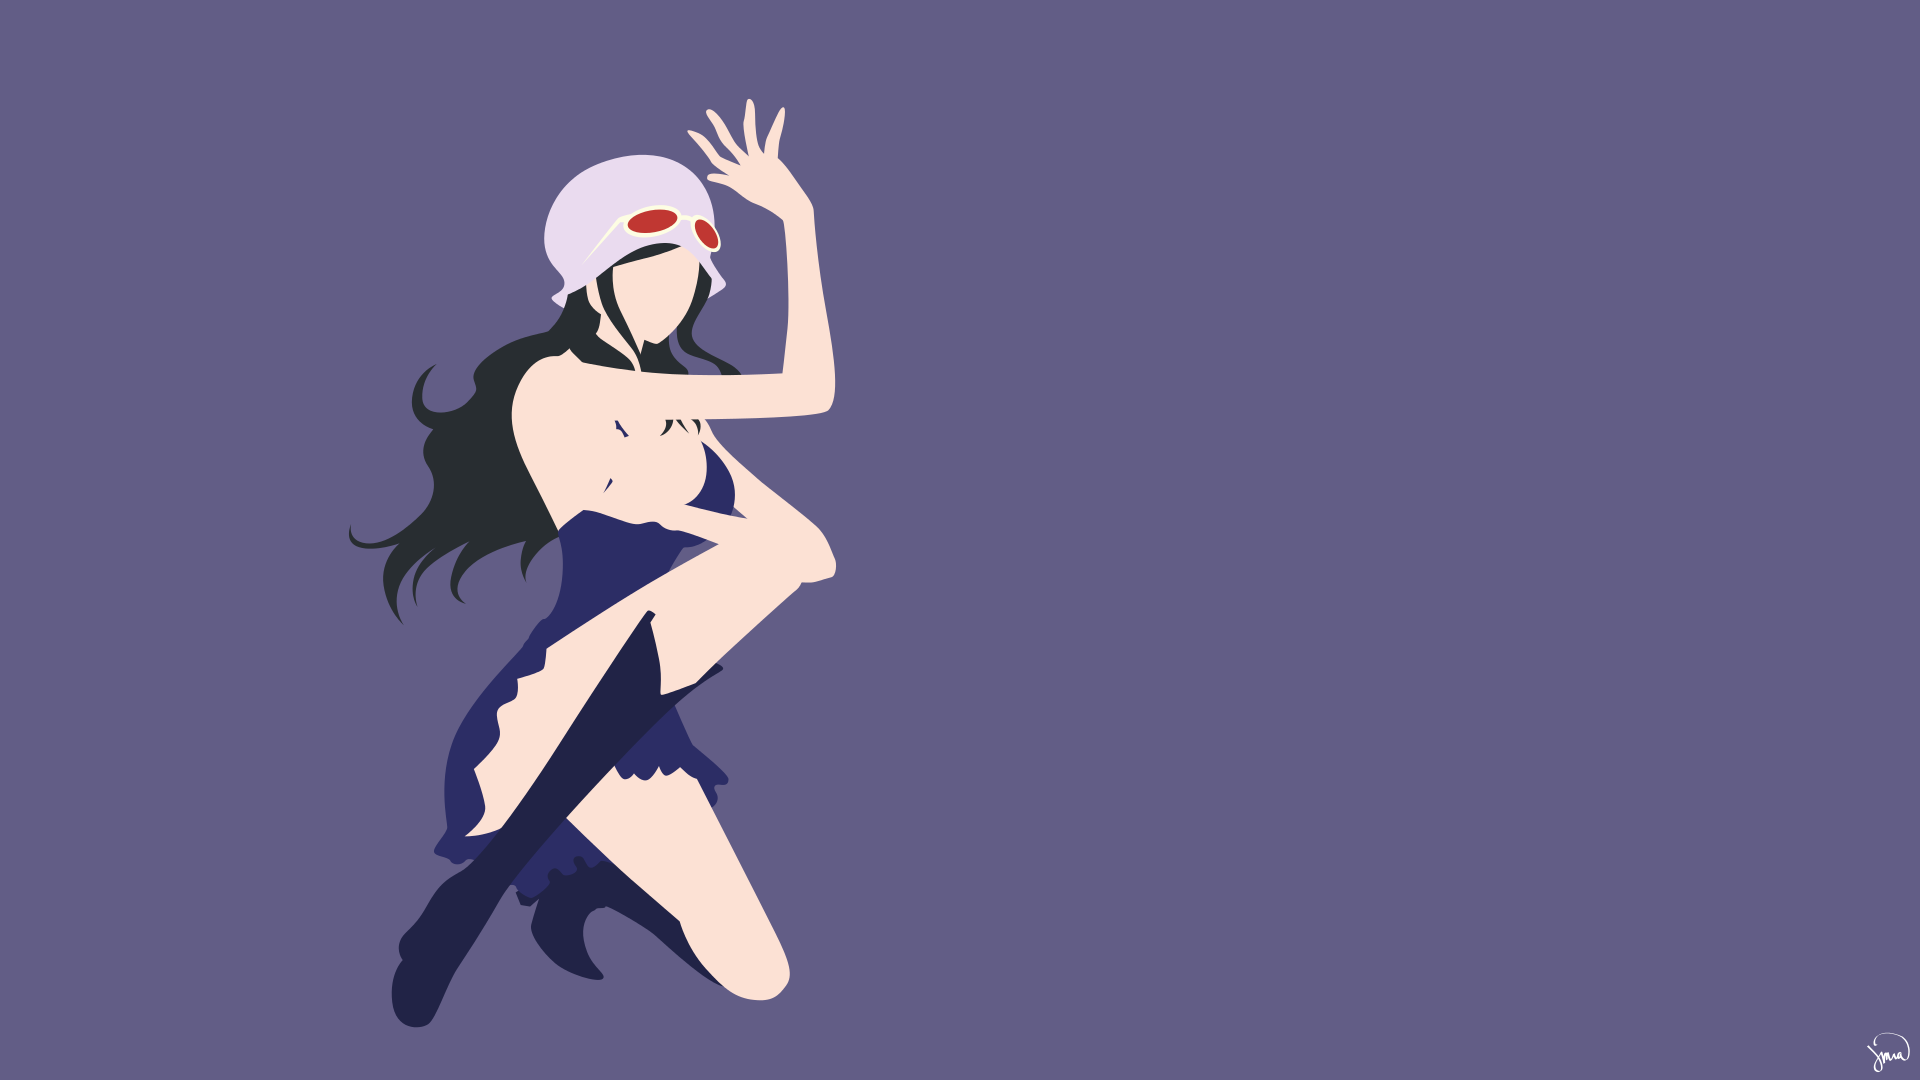 One Piece Robin Minimalist Wallpapers - Wallpaper Cave.